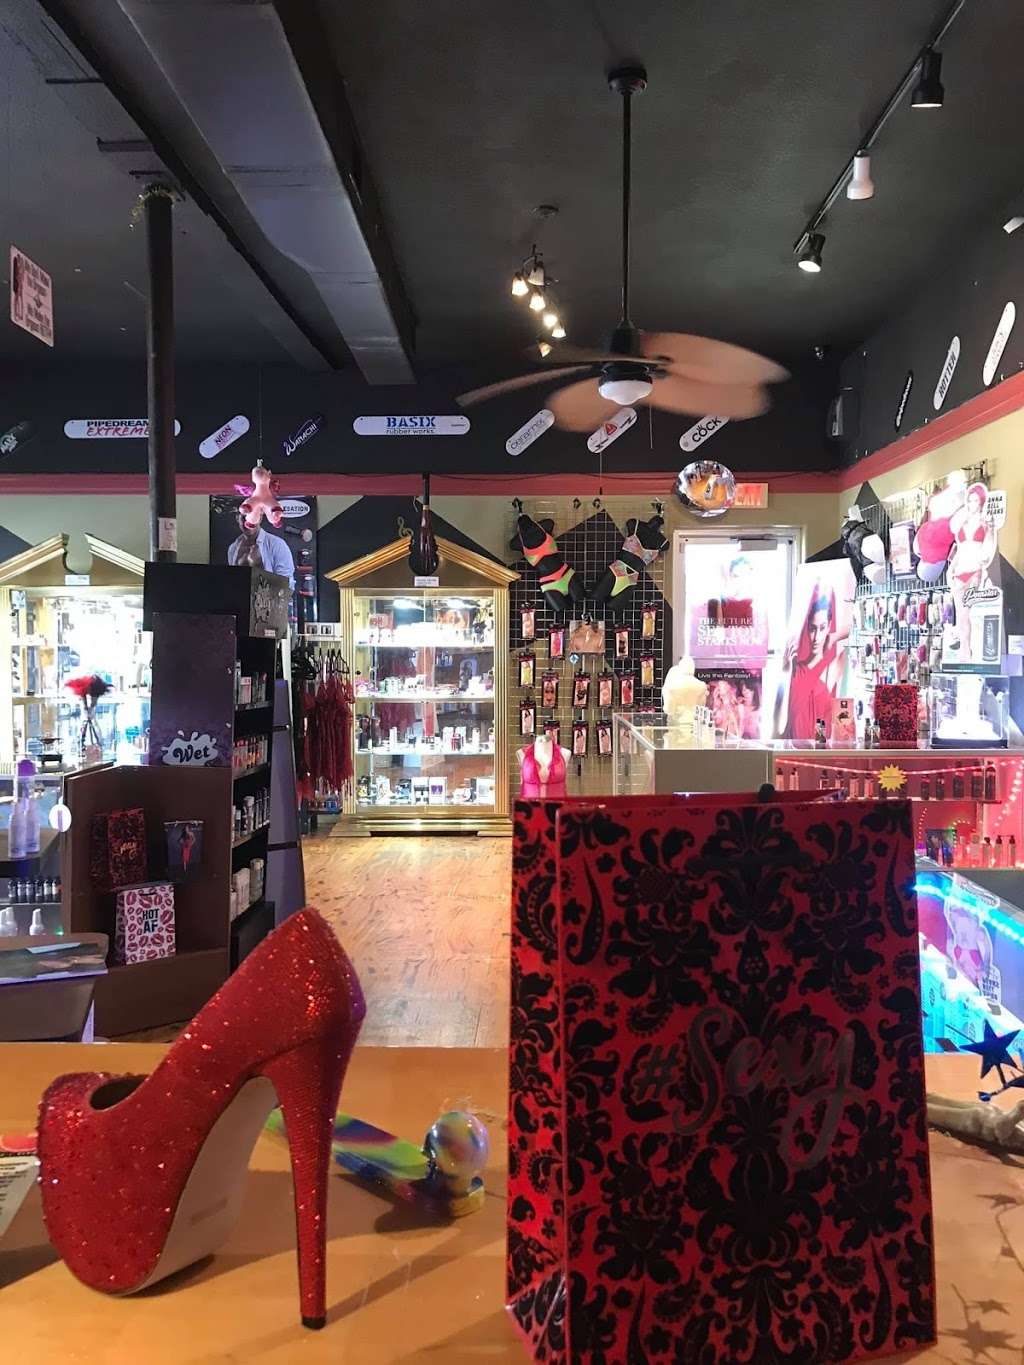 Wild Things Lingerie & Adult Novelty Store - clothing store  | Photo 7 of 9 | Address: 5340 E Silver Springs Blvd, Silver Springs, FL 34488, USA | Phone: (352) 236-5298